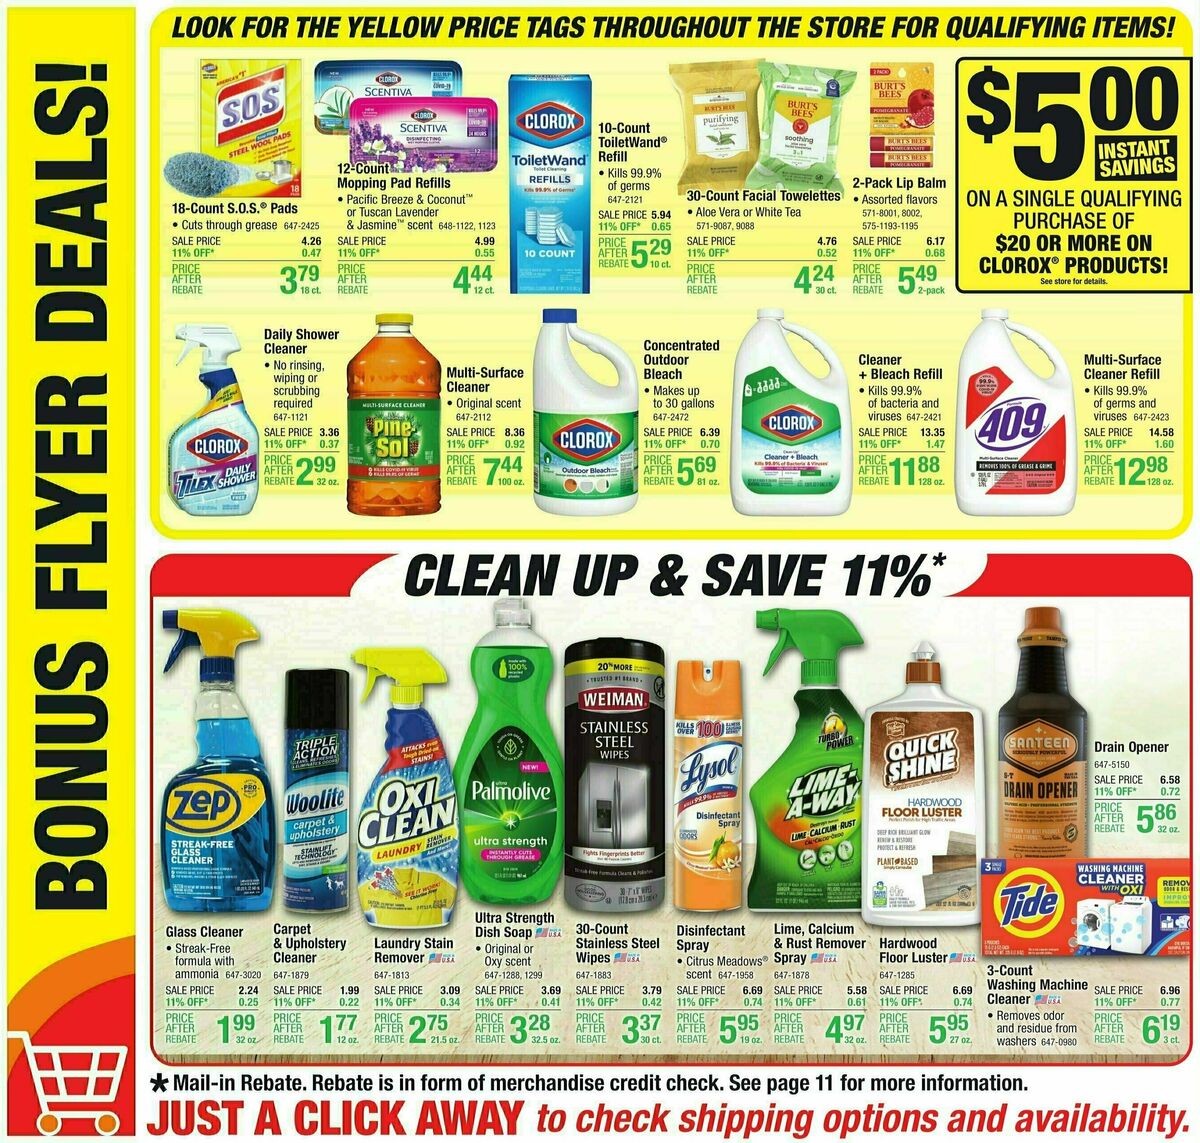 Menards Home Essentials Weekly Ad from August 2